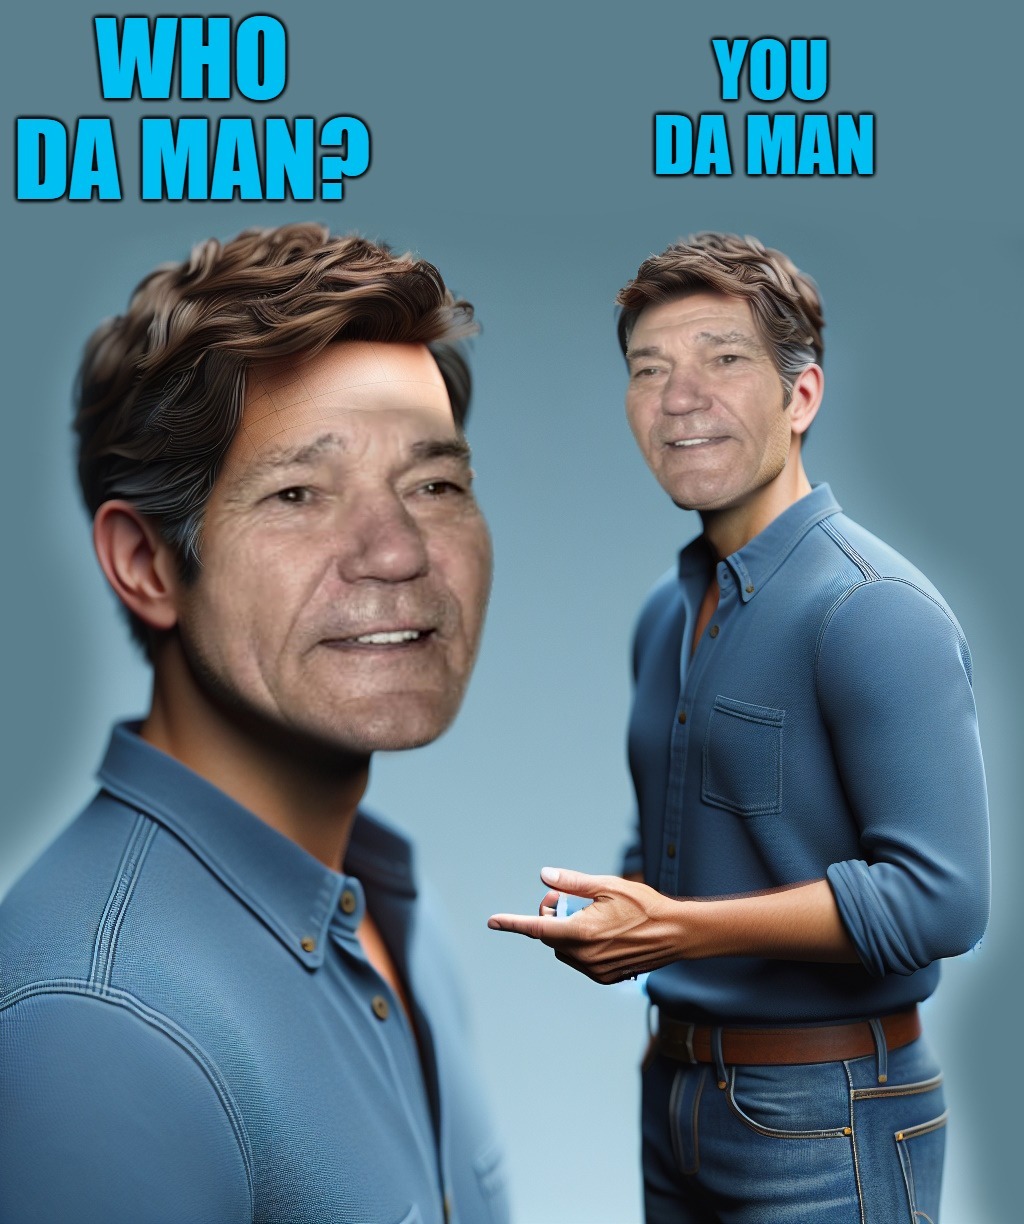 Lew da man | image tagged in shy,modest,easy on the eyes,handsome | made w/ Imgflip meme maker